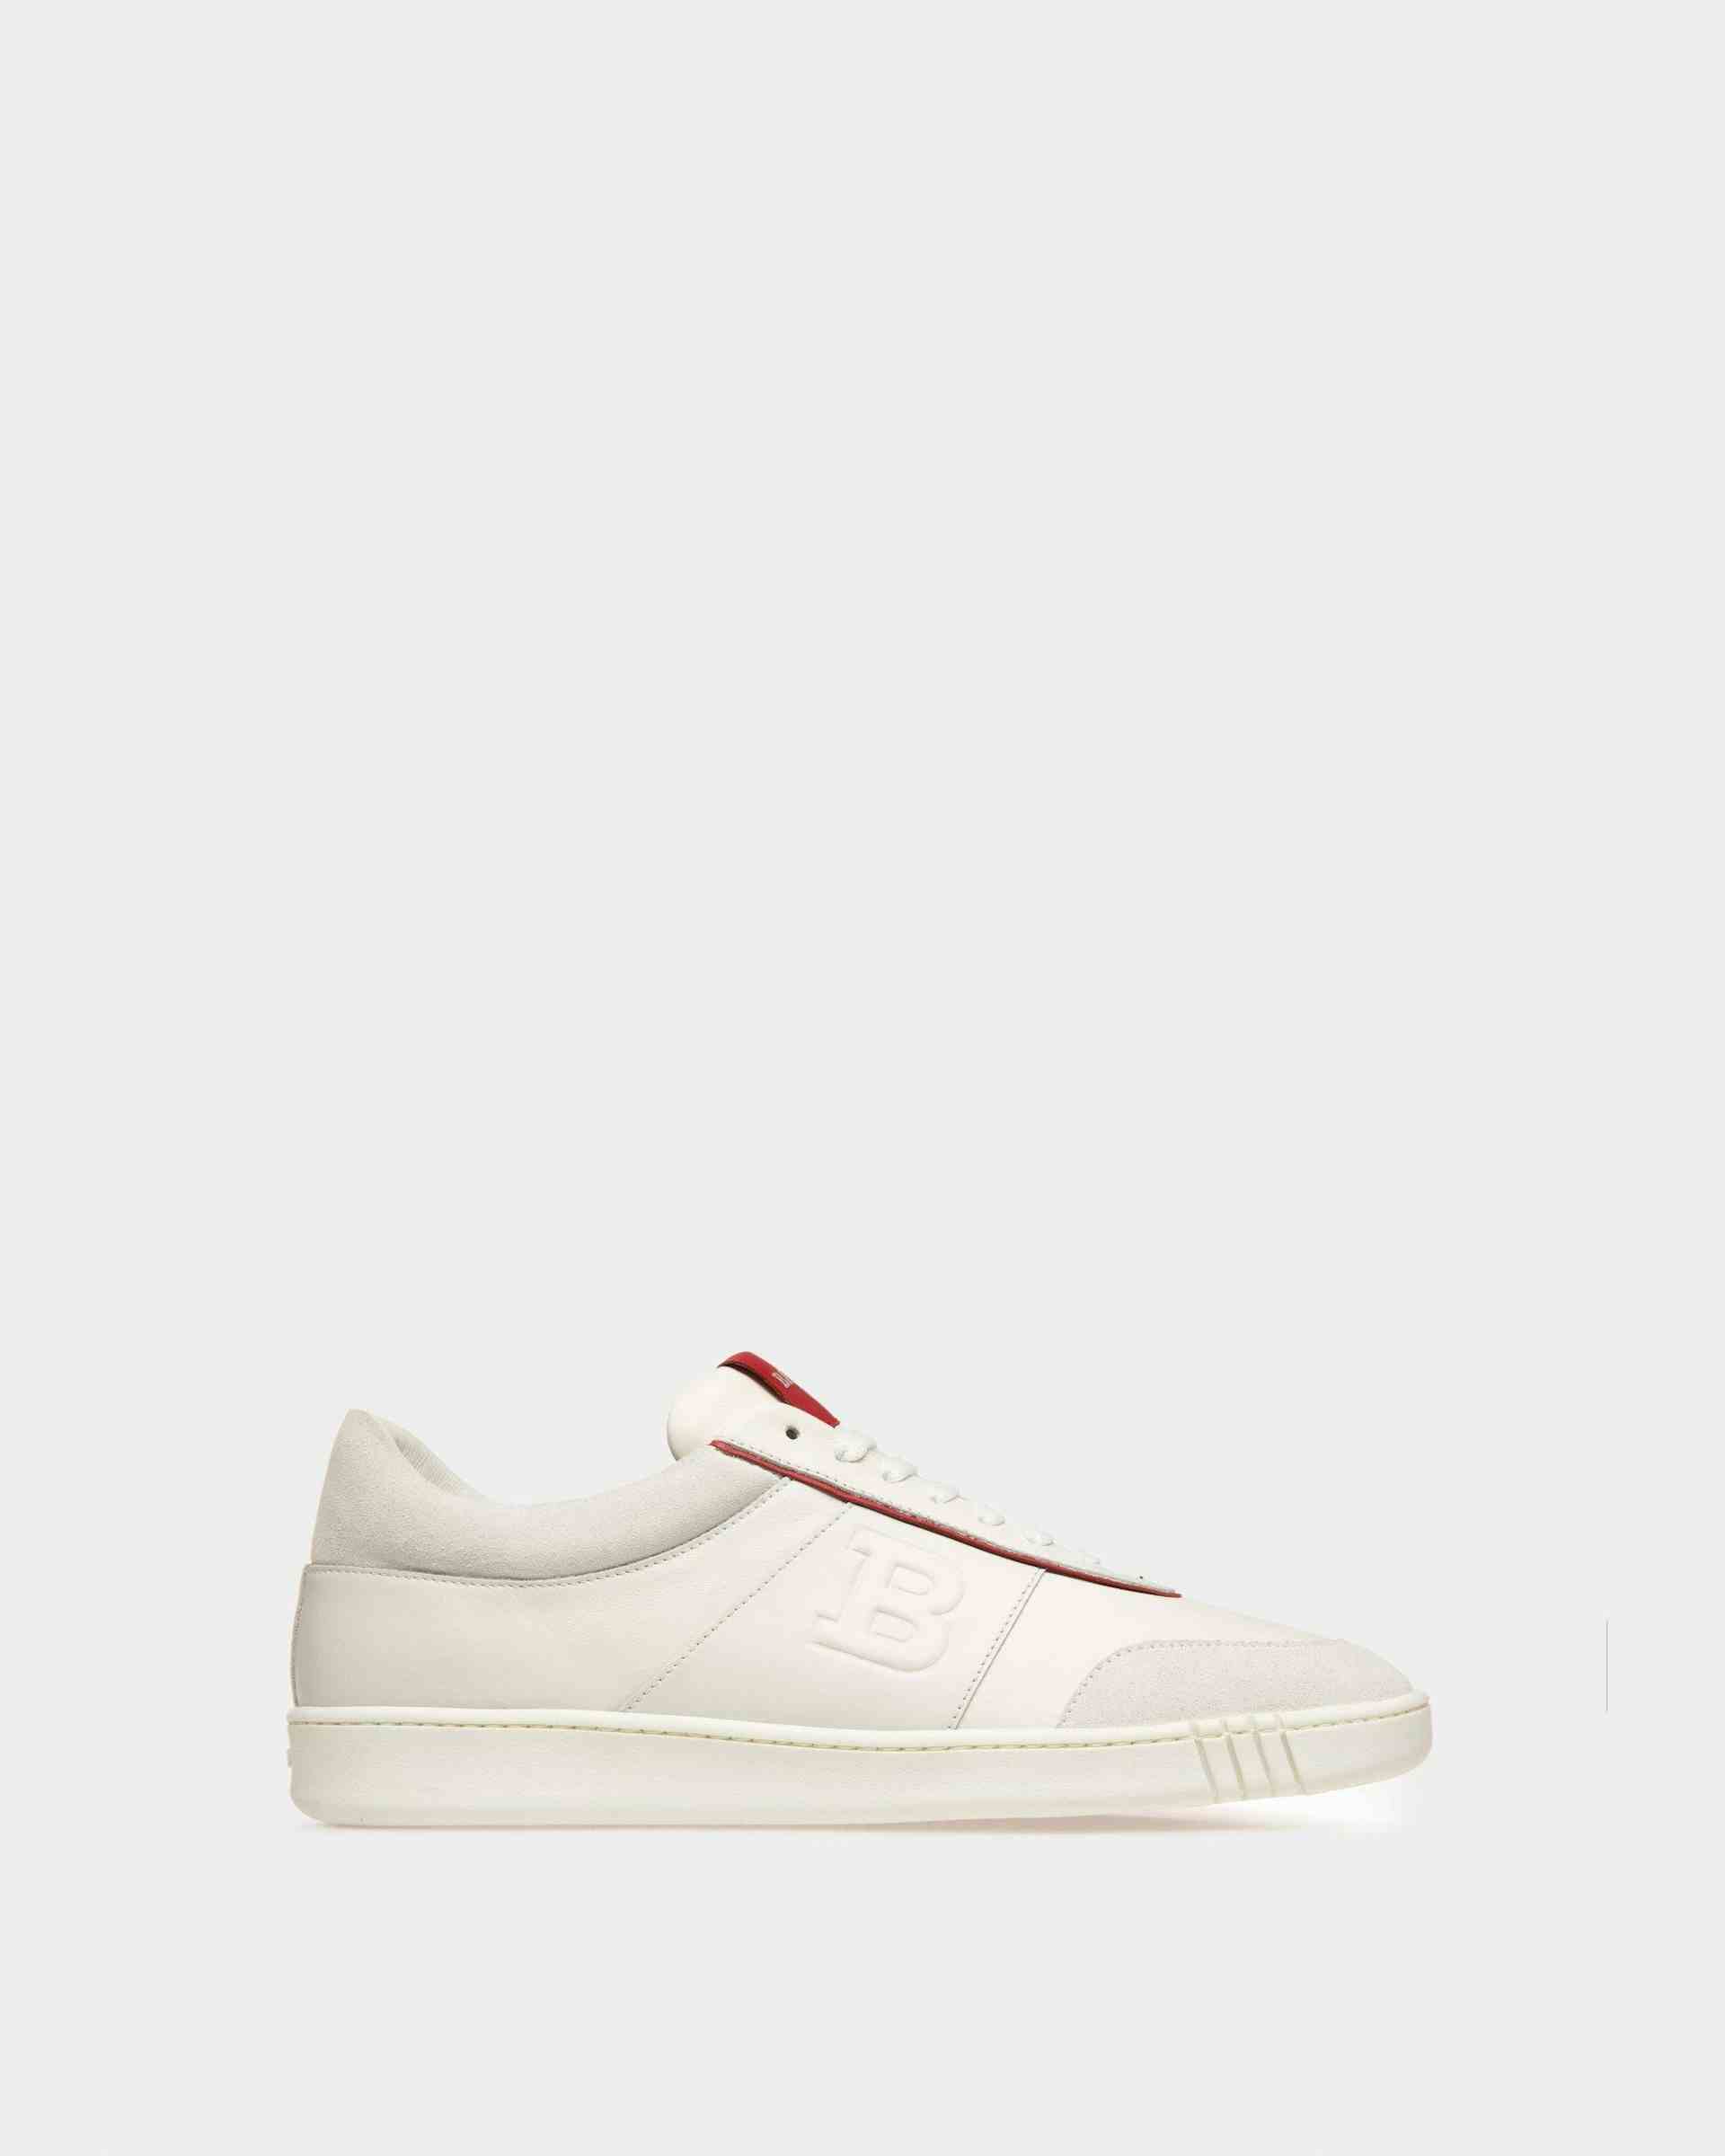 Wallys Leather And Suede Sneaker In White And Red - Men's - Bally